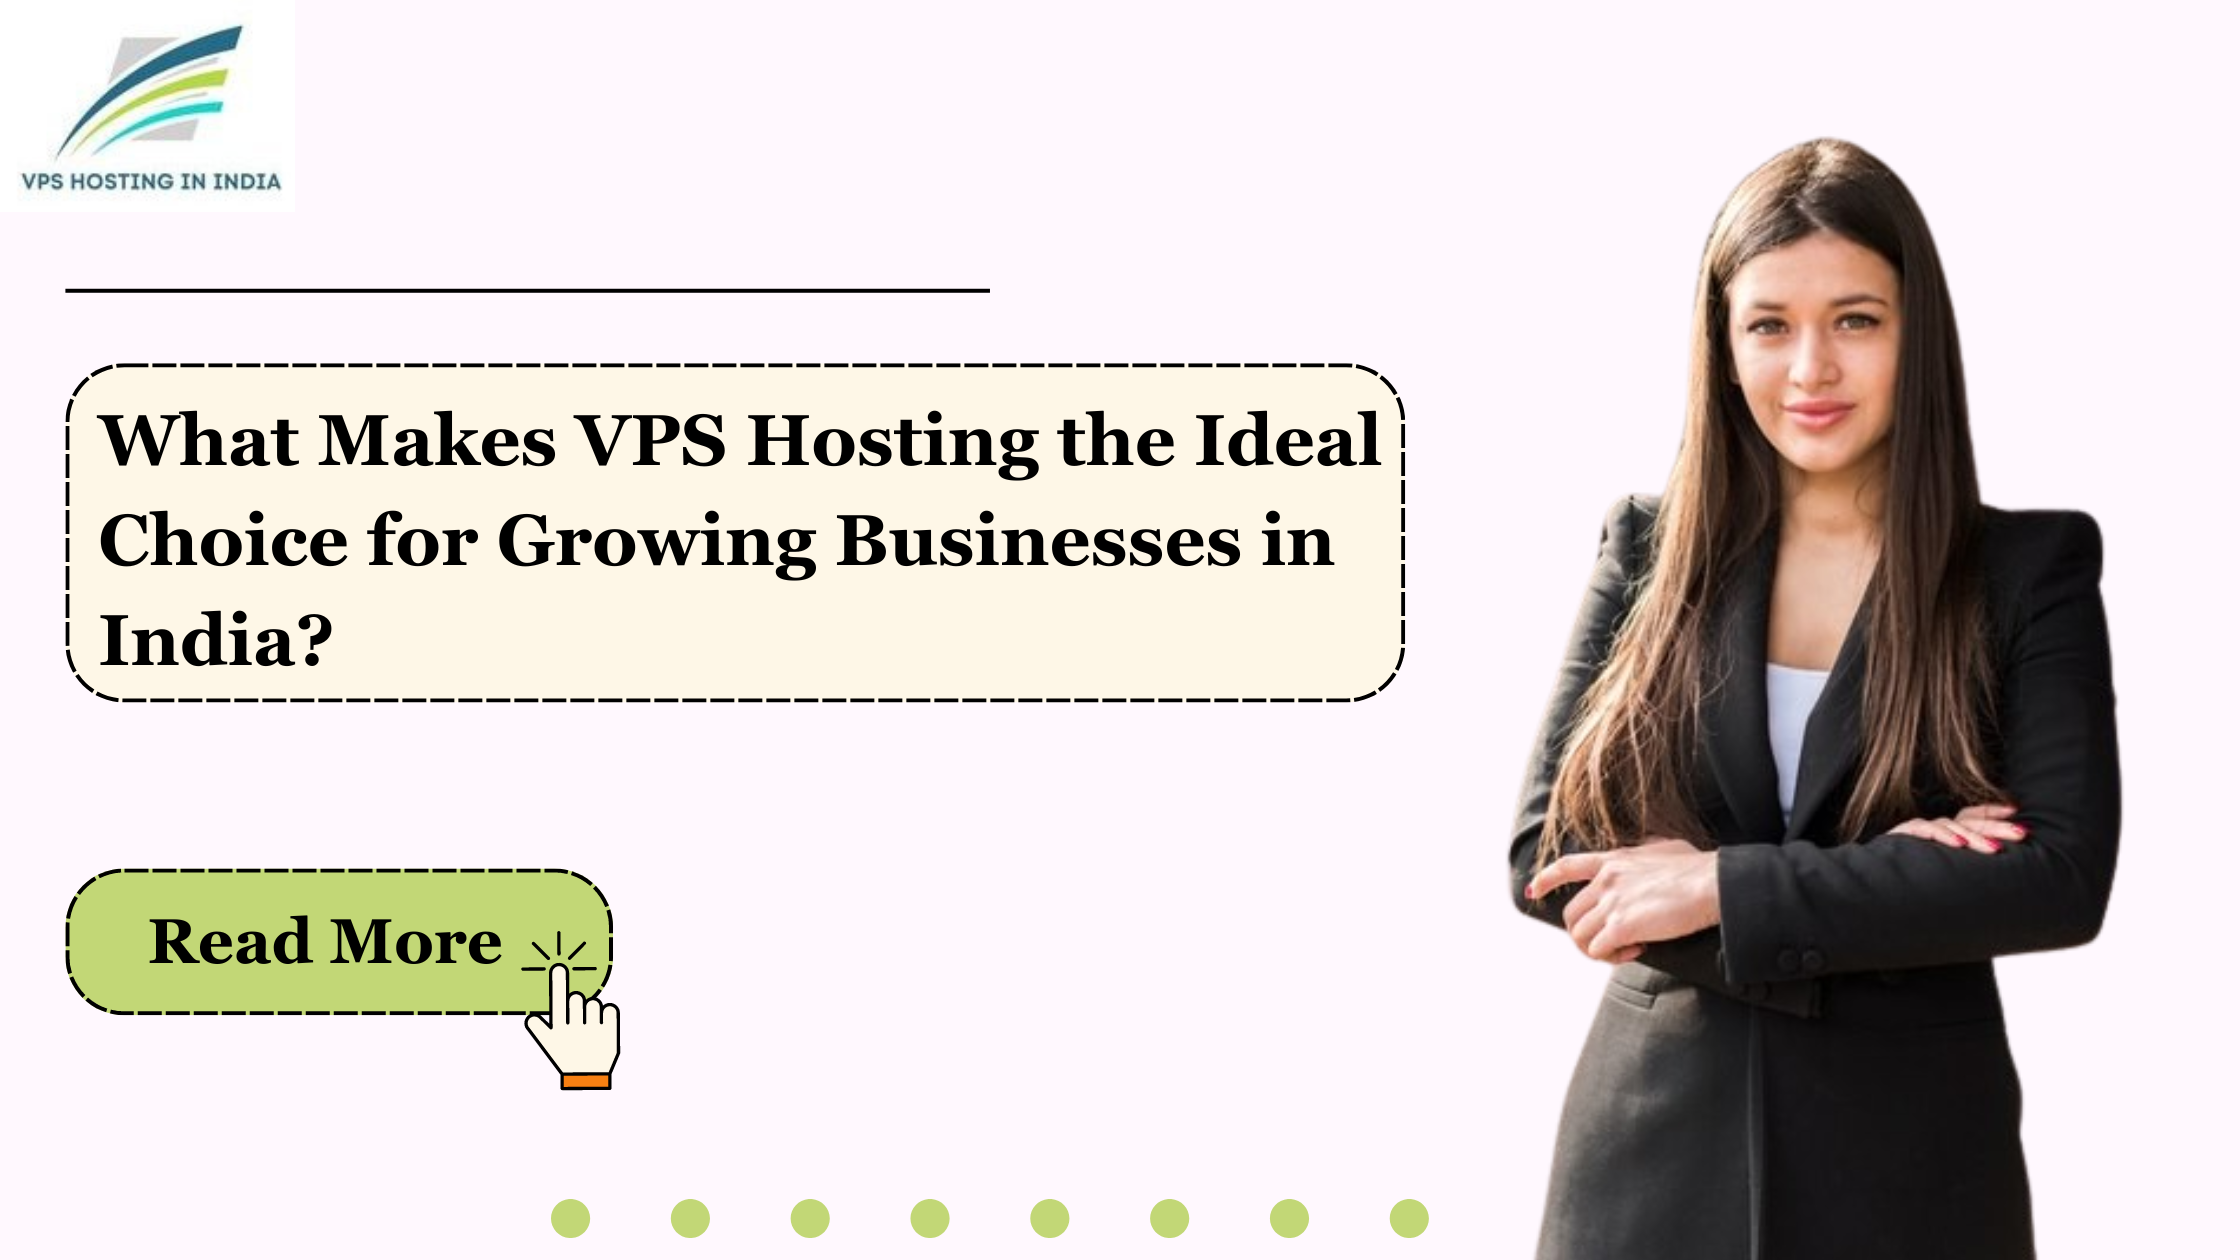 What Makes VPS Hosting the Ideal Choice for Growing Businesses in India